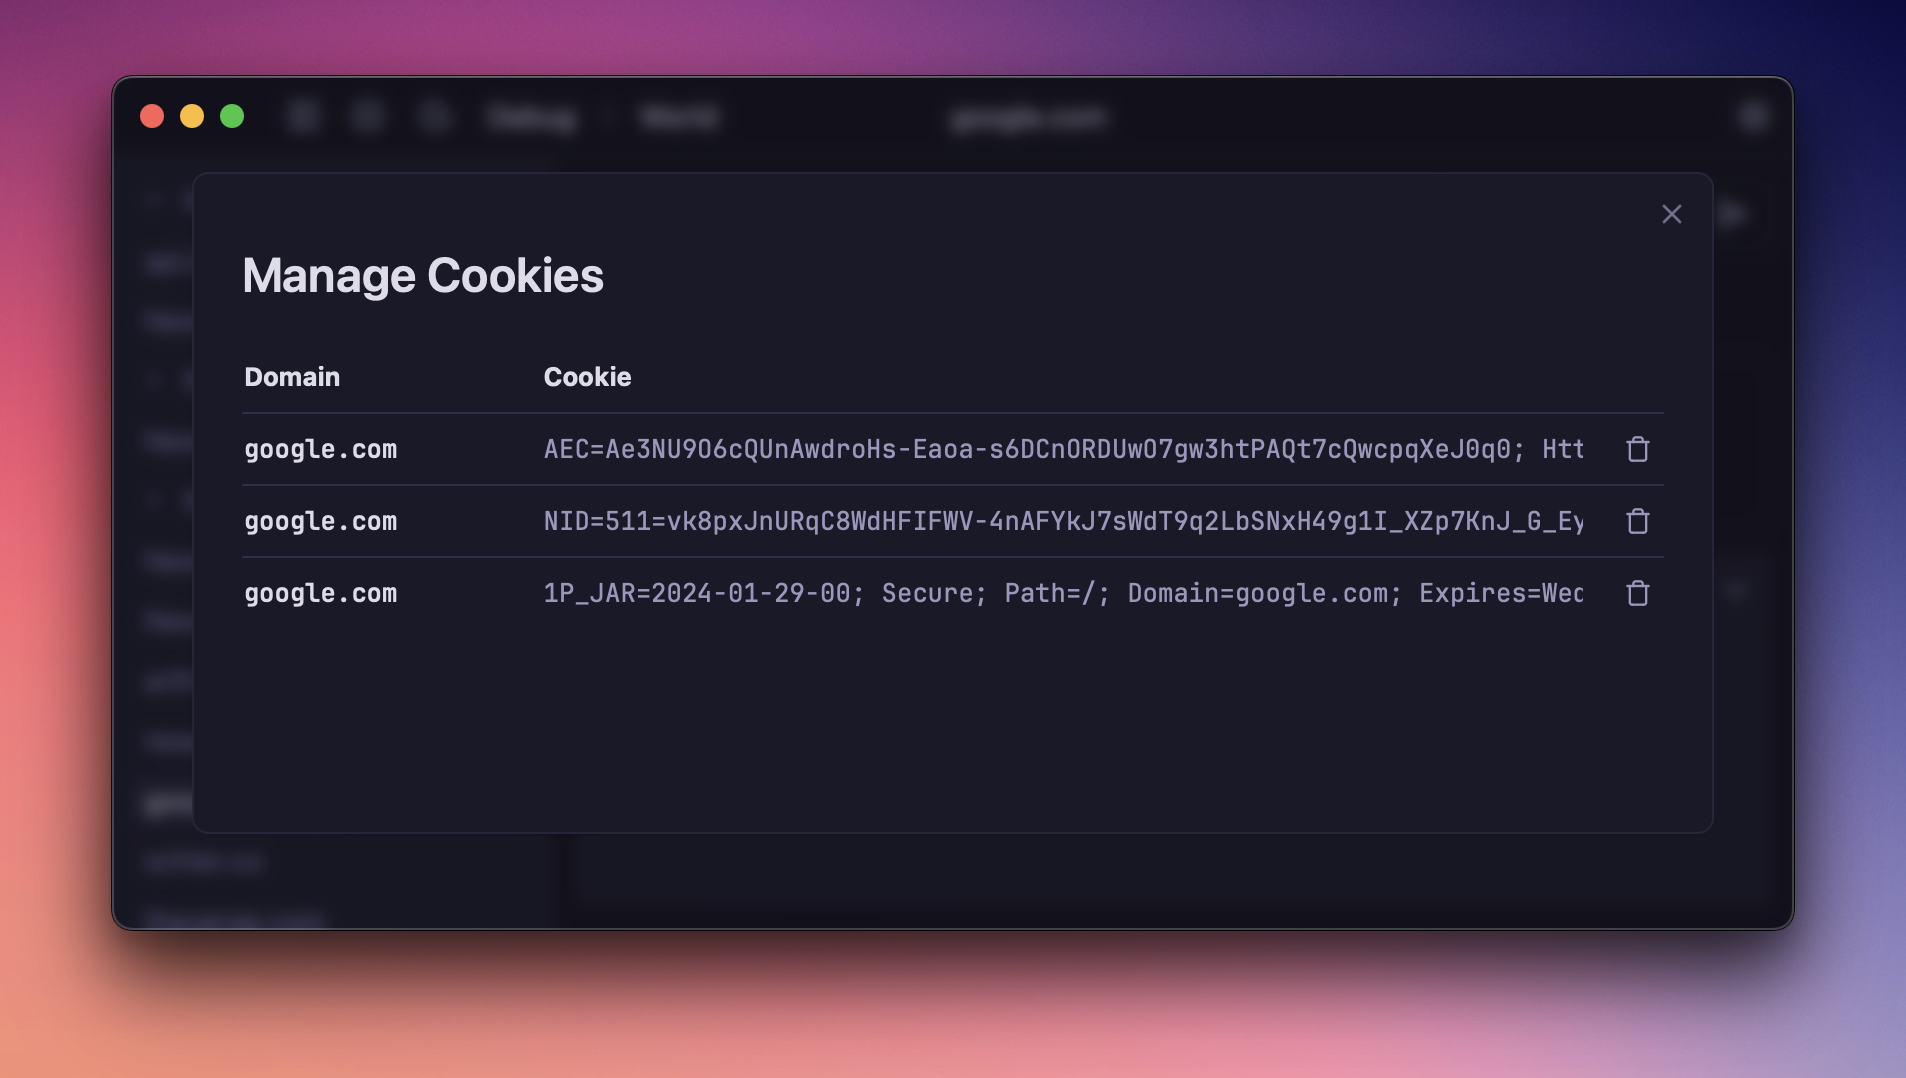 Manage cookies from the new cookie dialog